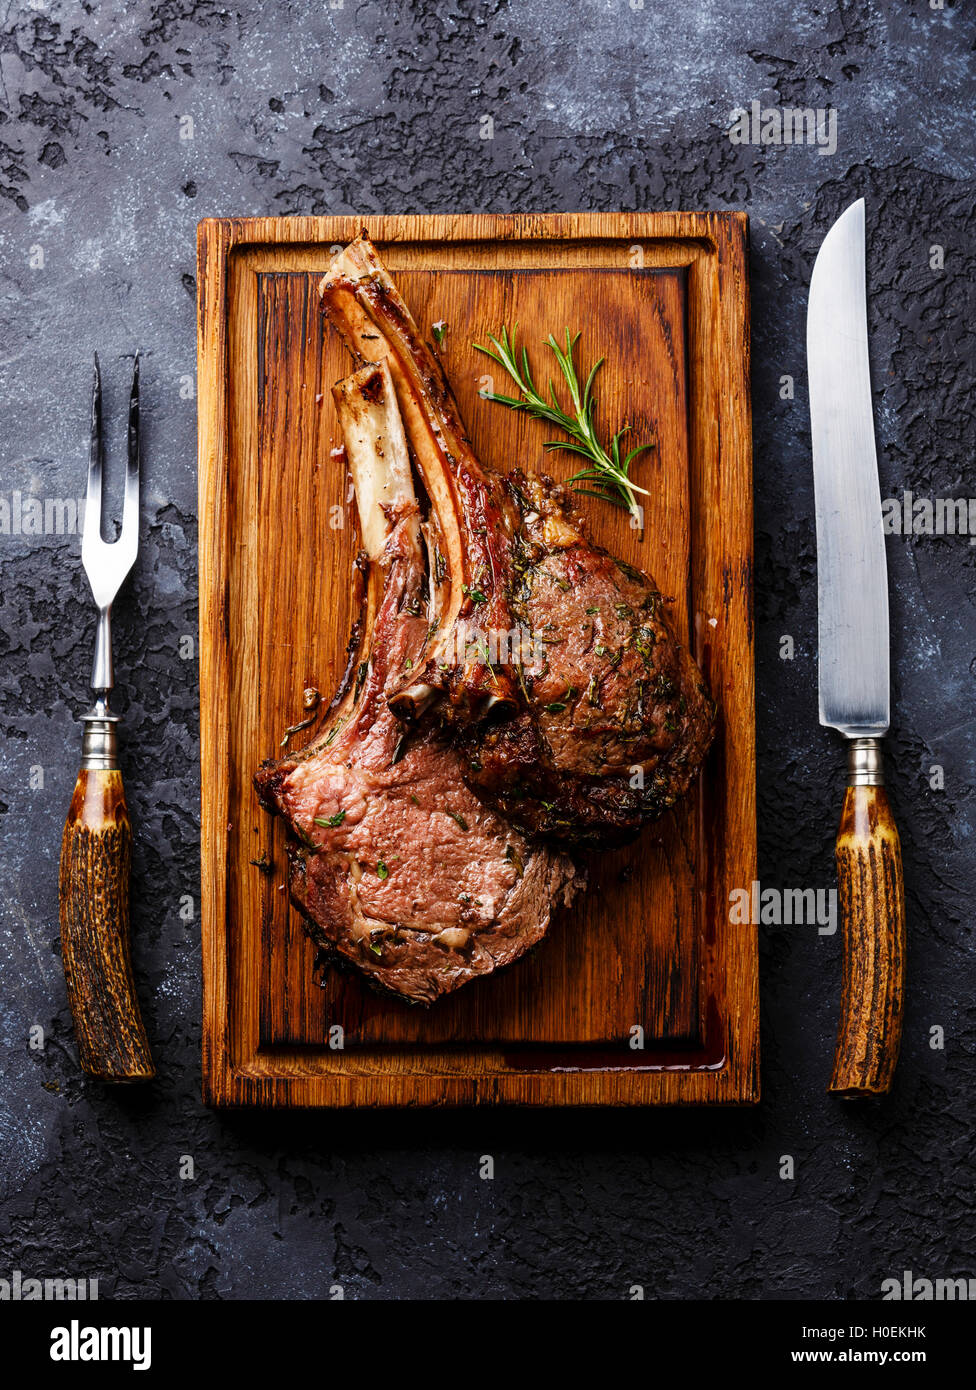 Roasted beef ribs on bone on wooden cutting board with knife and fork carving set on dark background Stock Photo